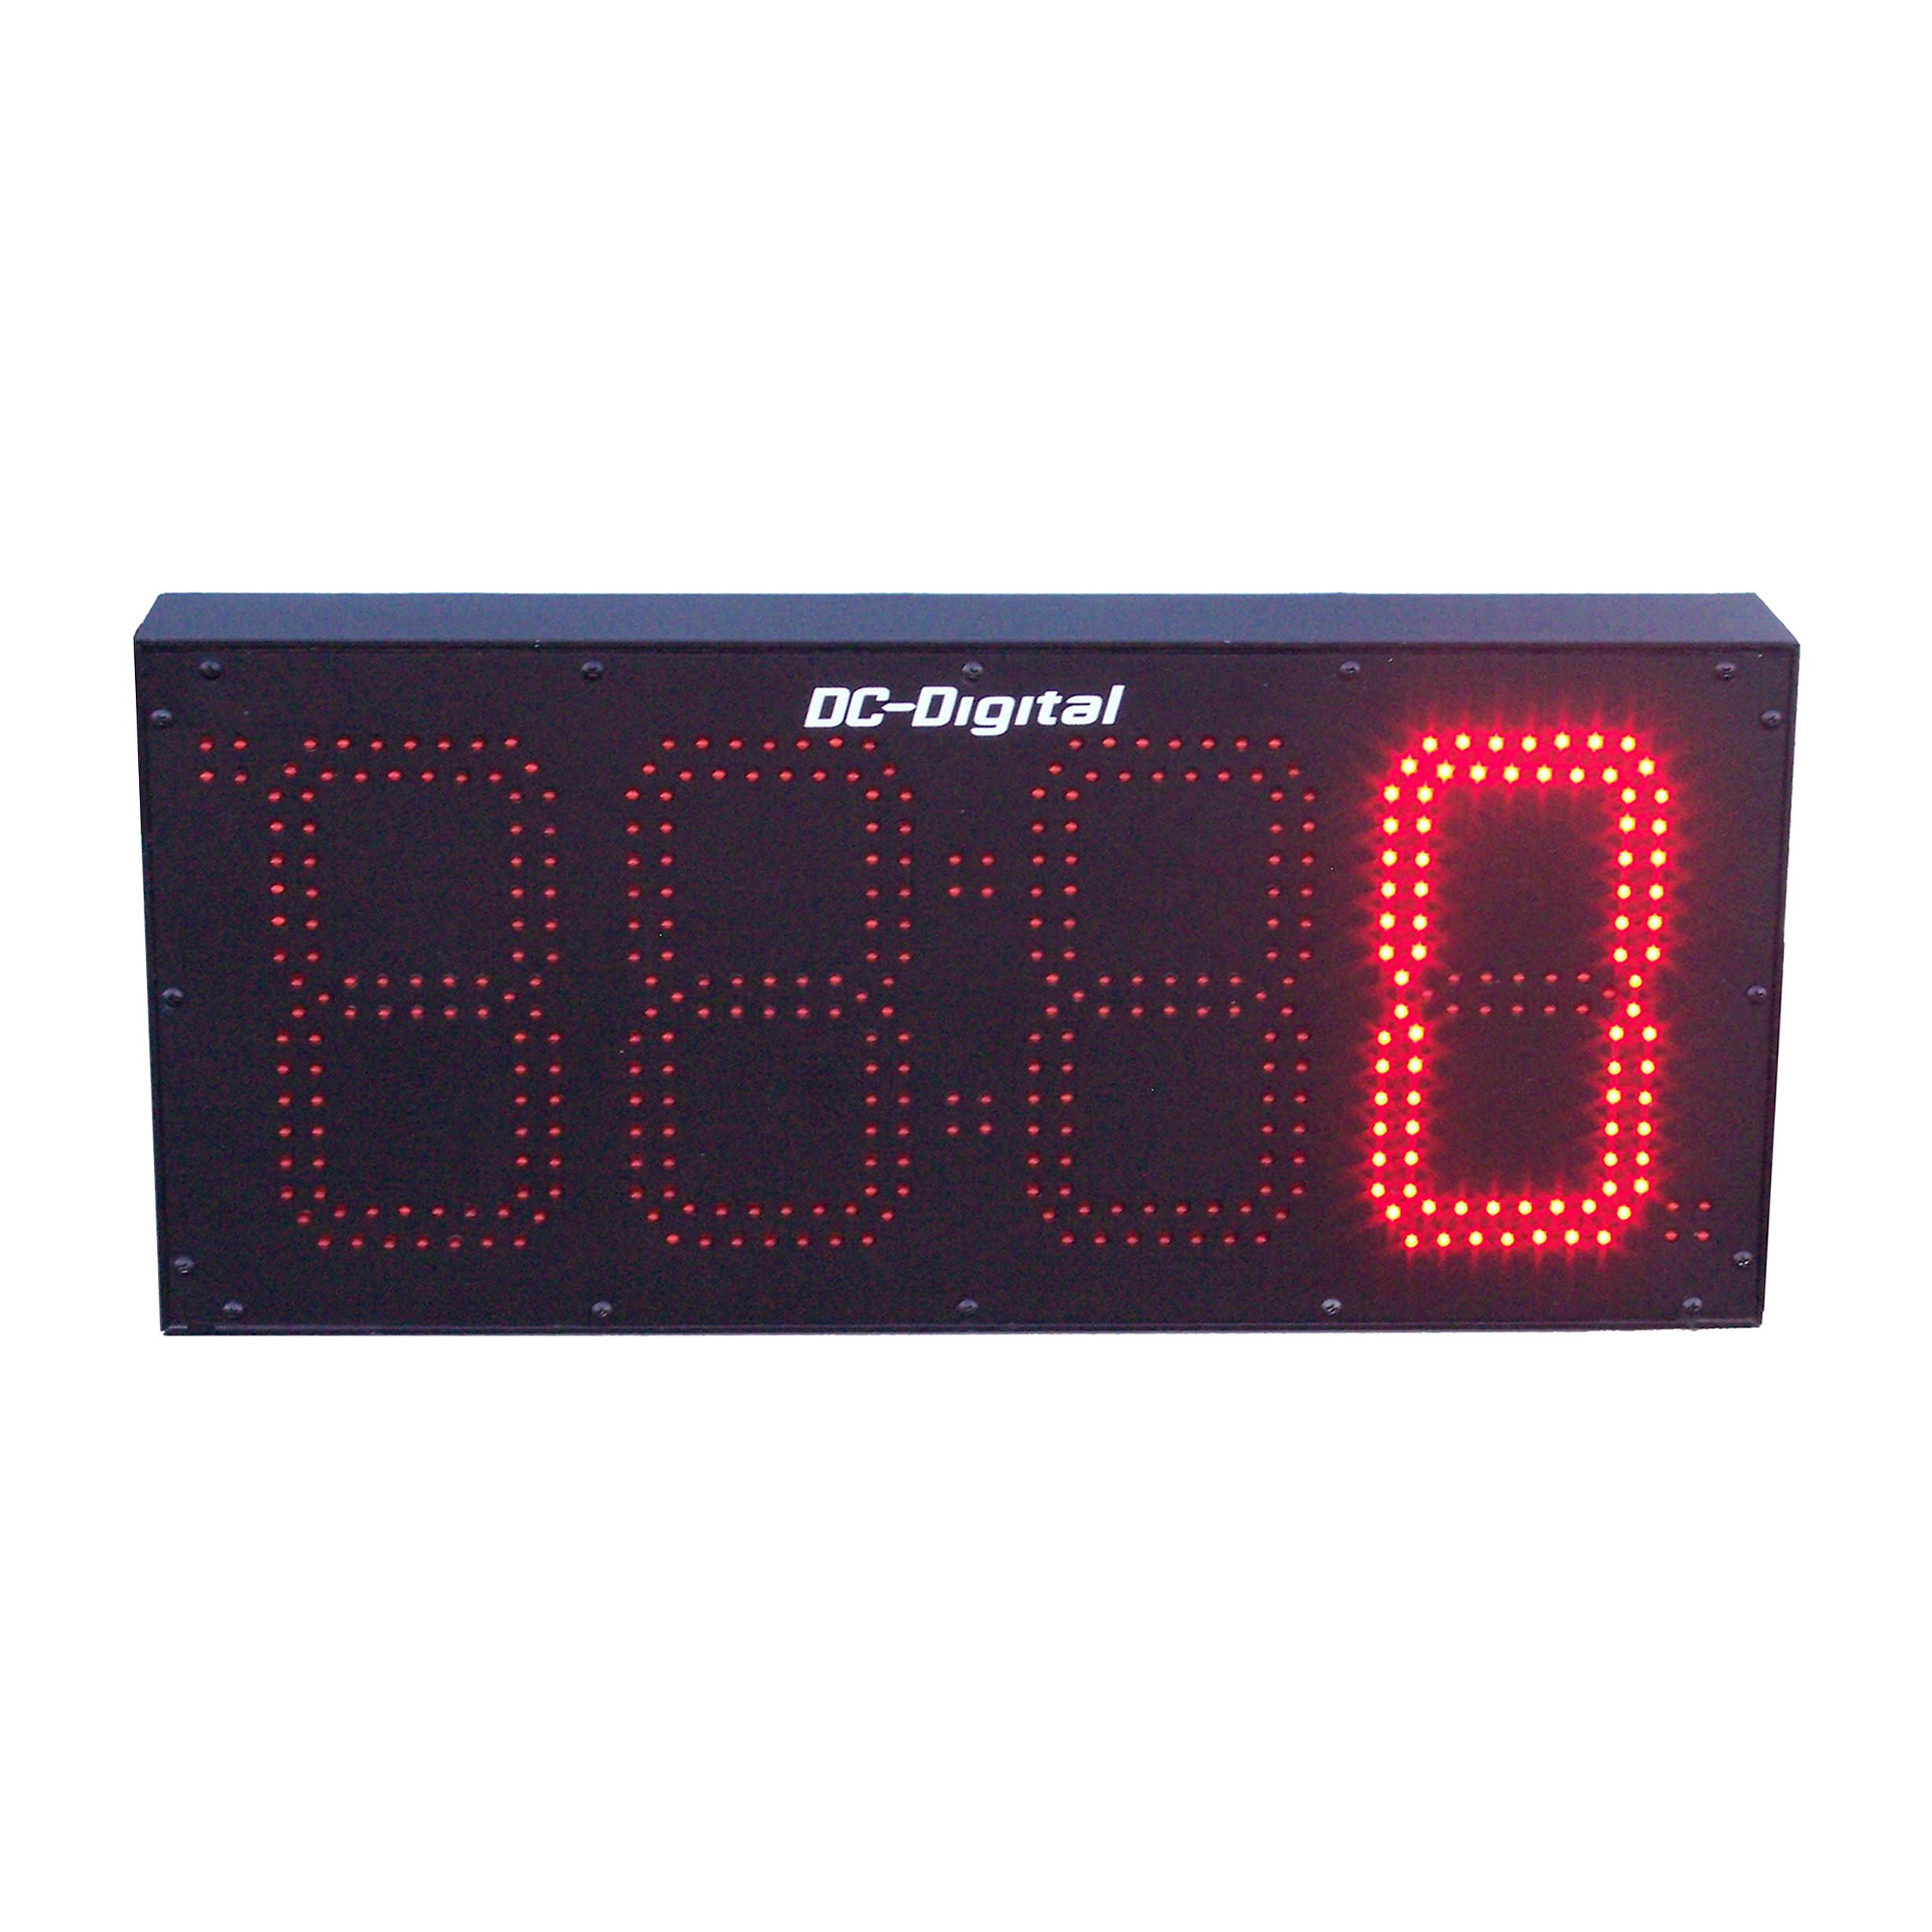 (DC-80T-UP-DAYS-IN) 8.0 Inch LED Digital, Environmentally Sealed Push-Button Controlled, Count Up by Days Timer (INDOOR)